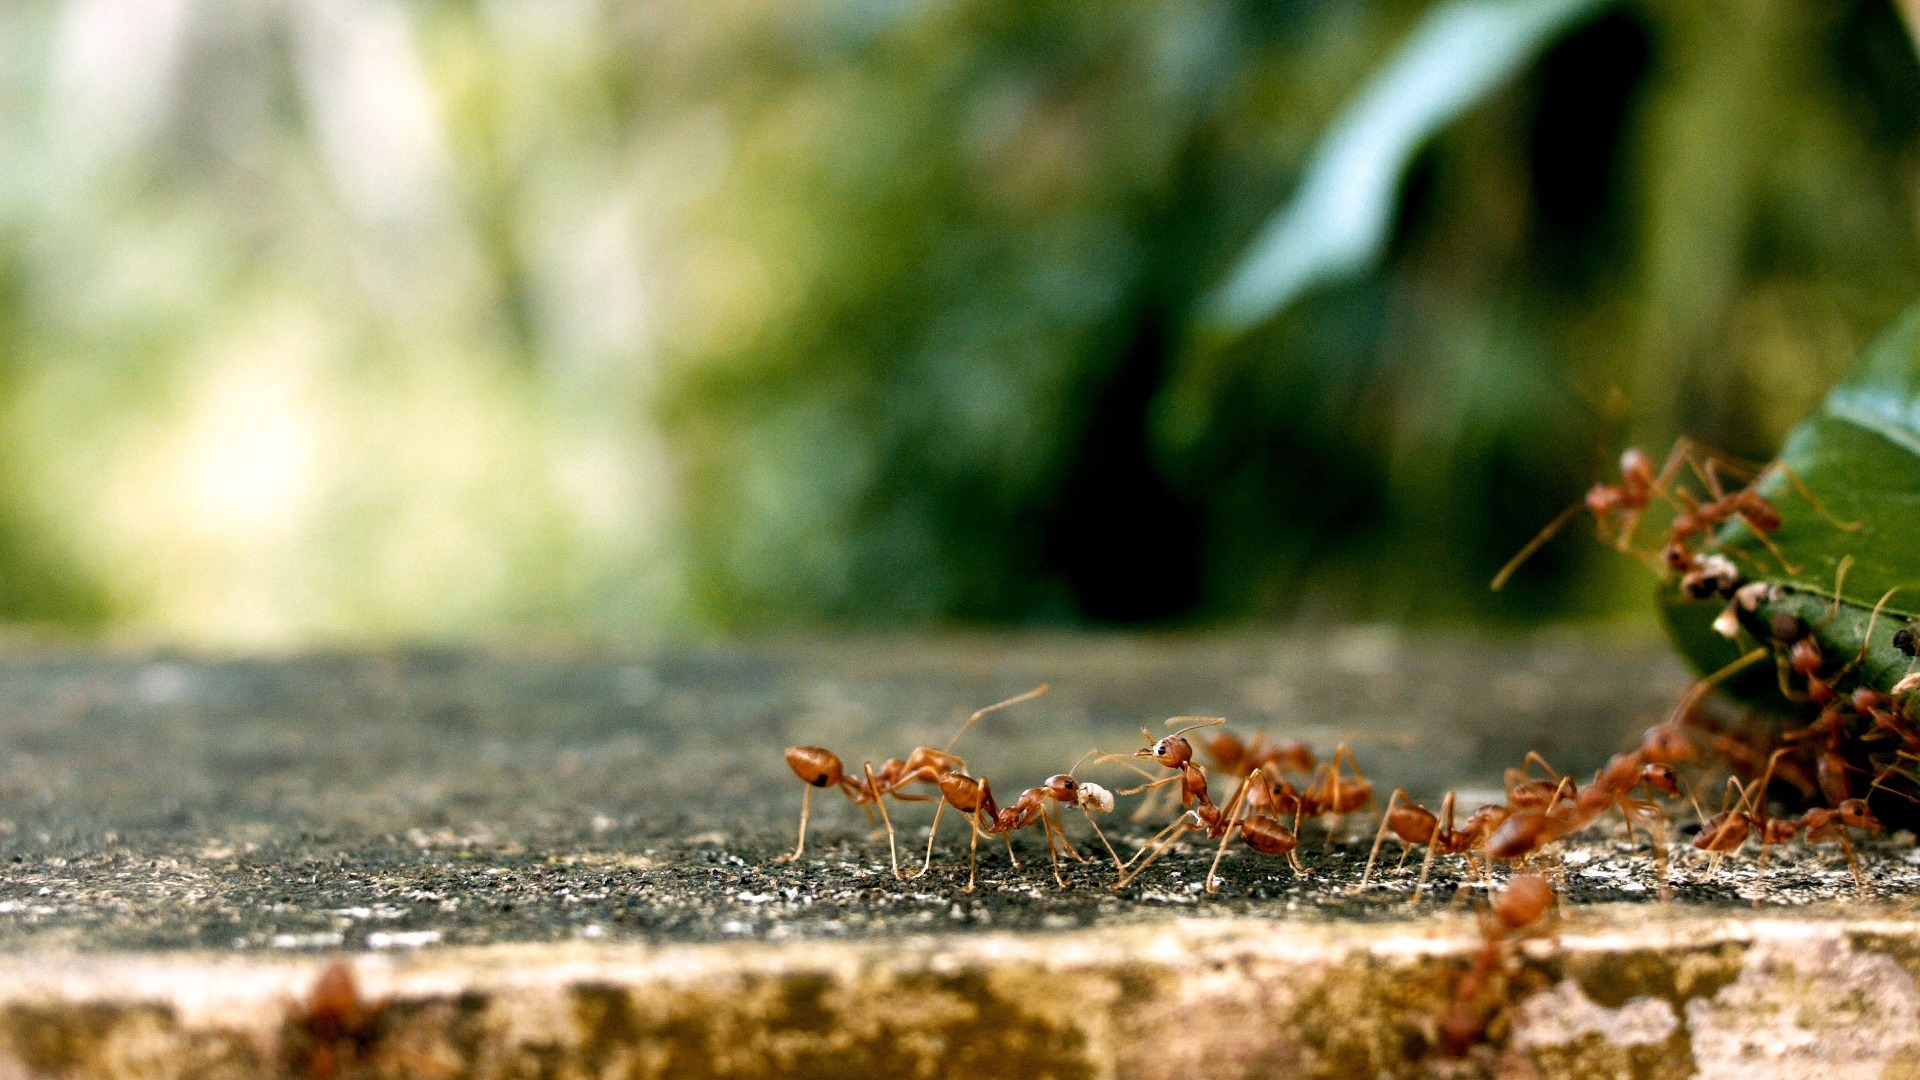 Ants getting into a home, showcasing the importance of pest-proofing your property